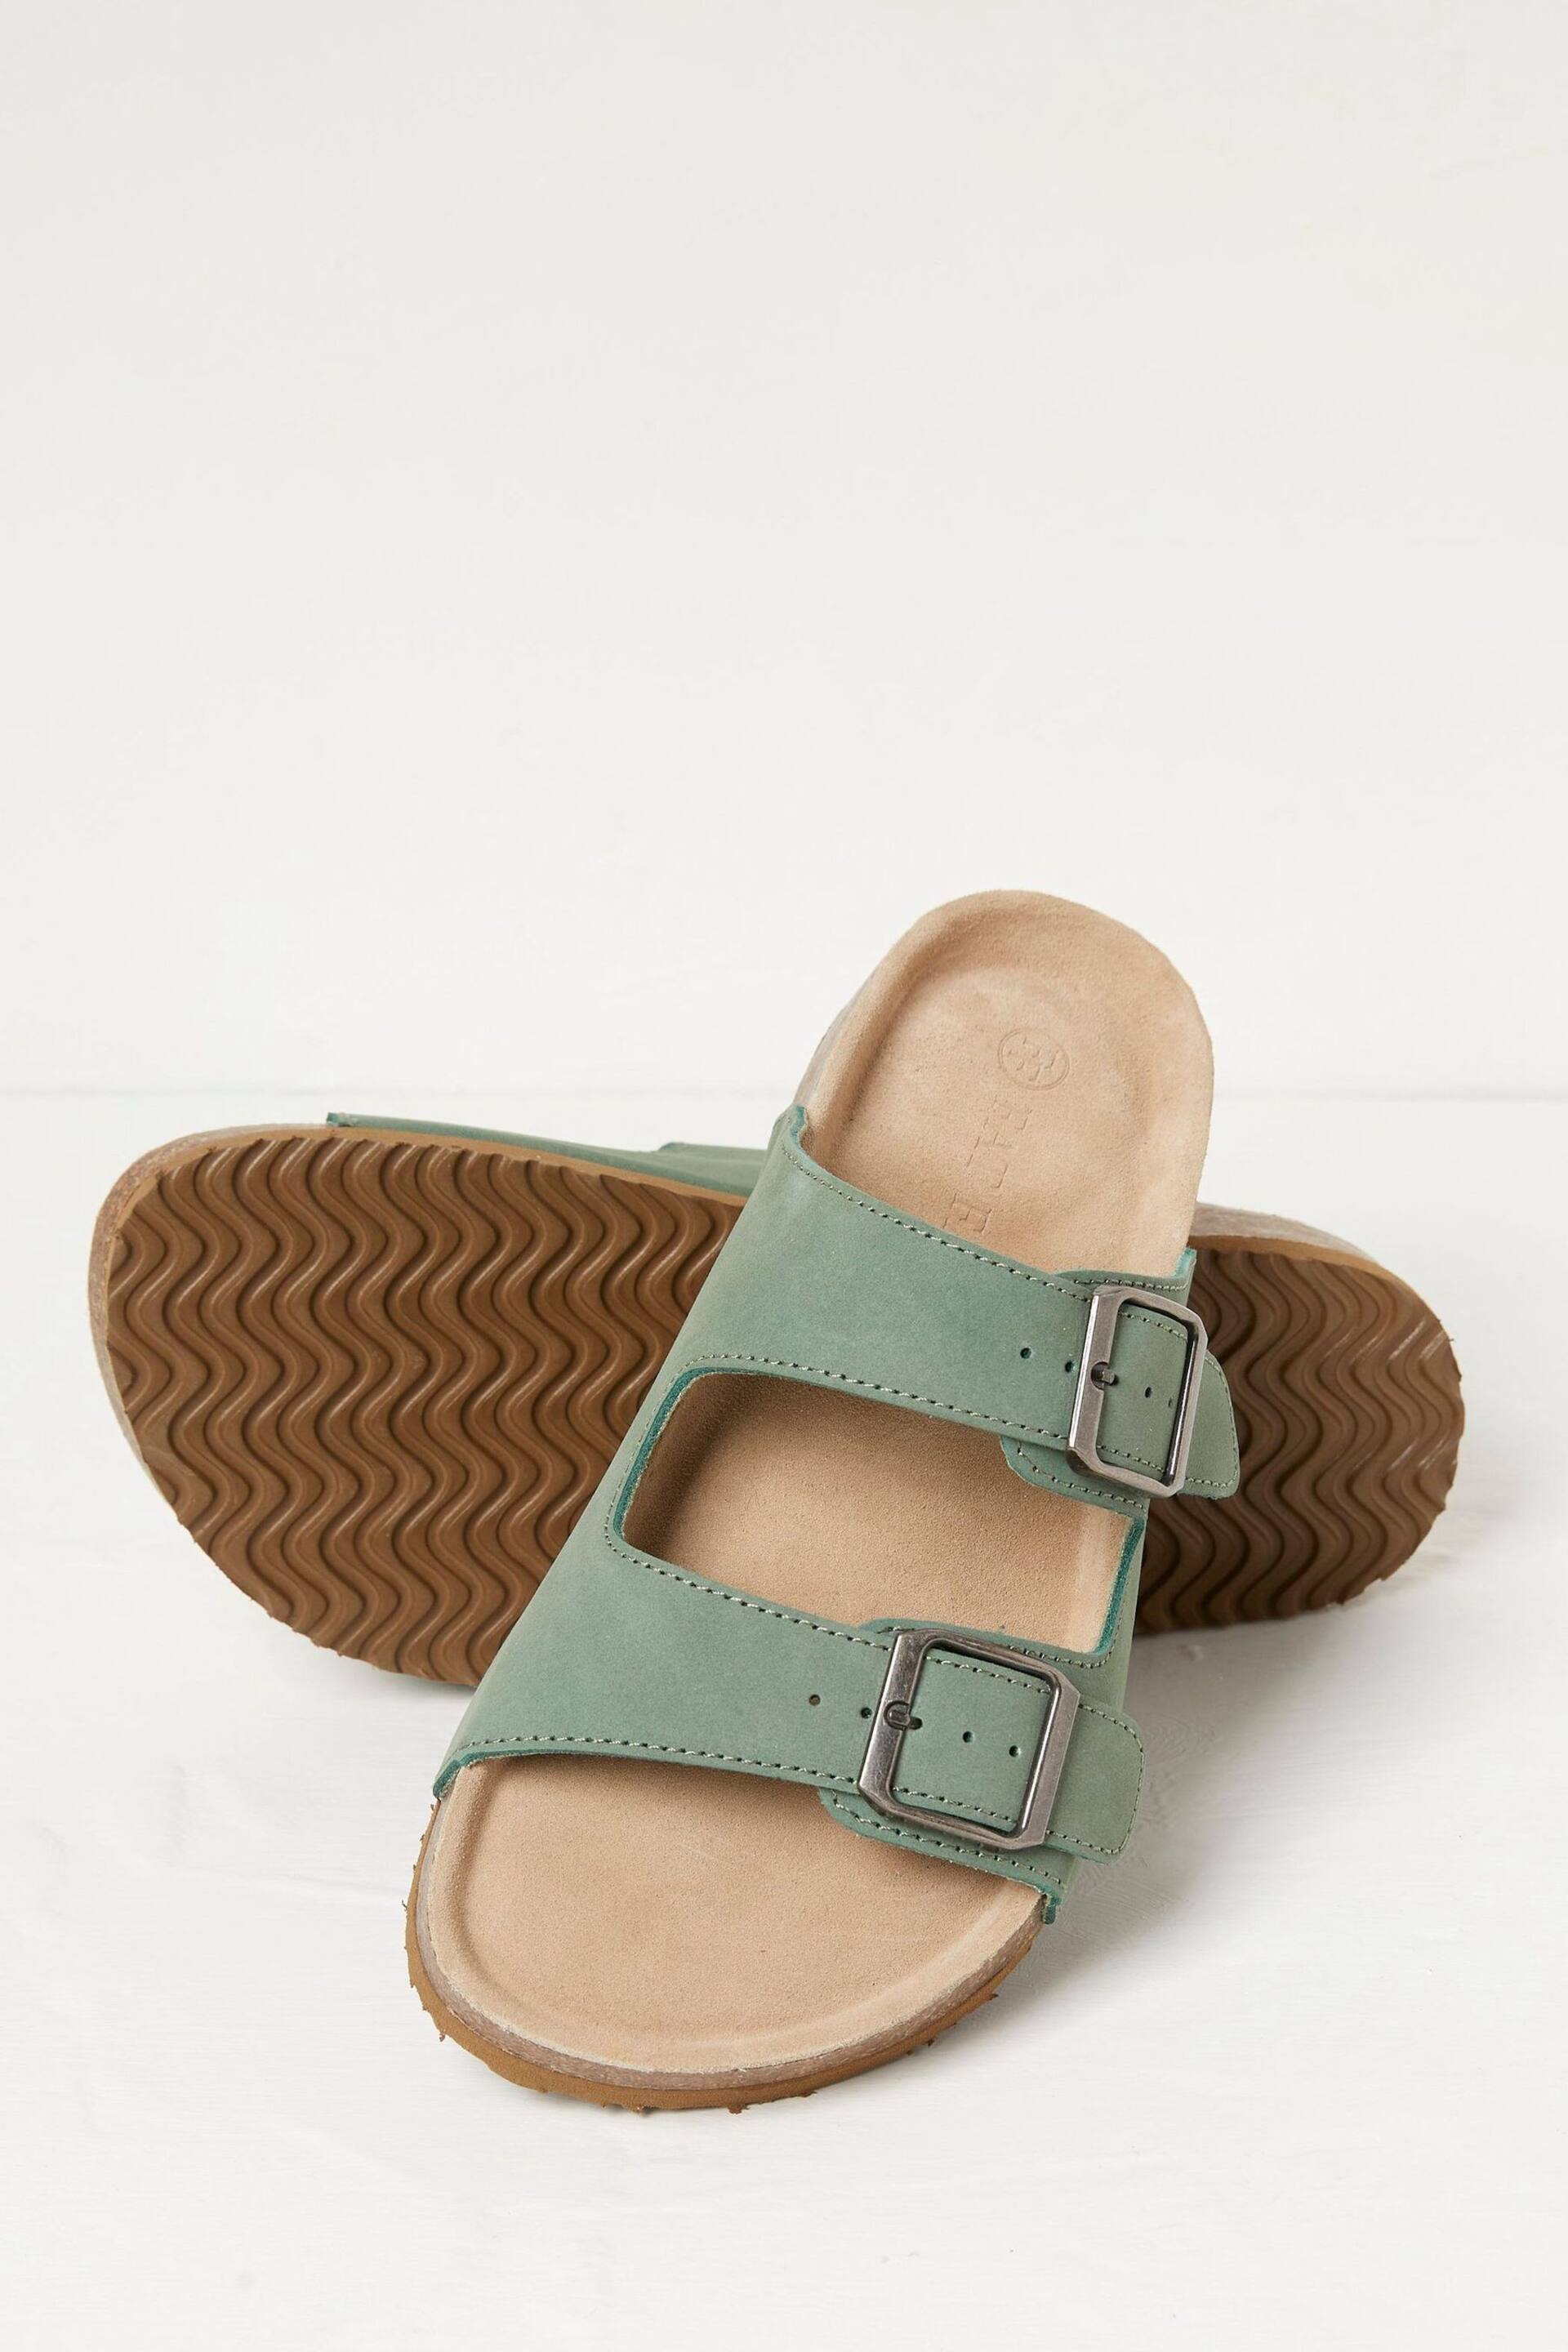 FatFace Green Meldon Footbed Sandals - Image 2 of 3